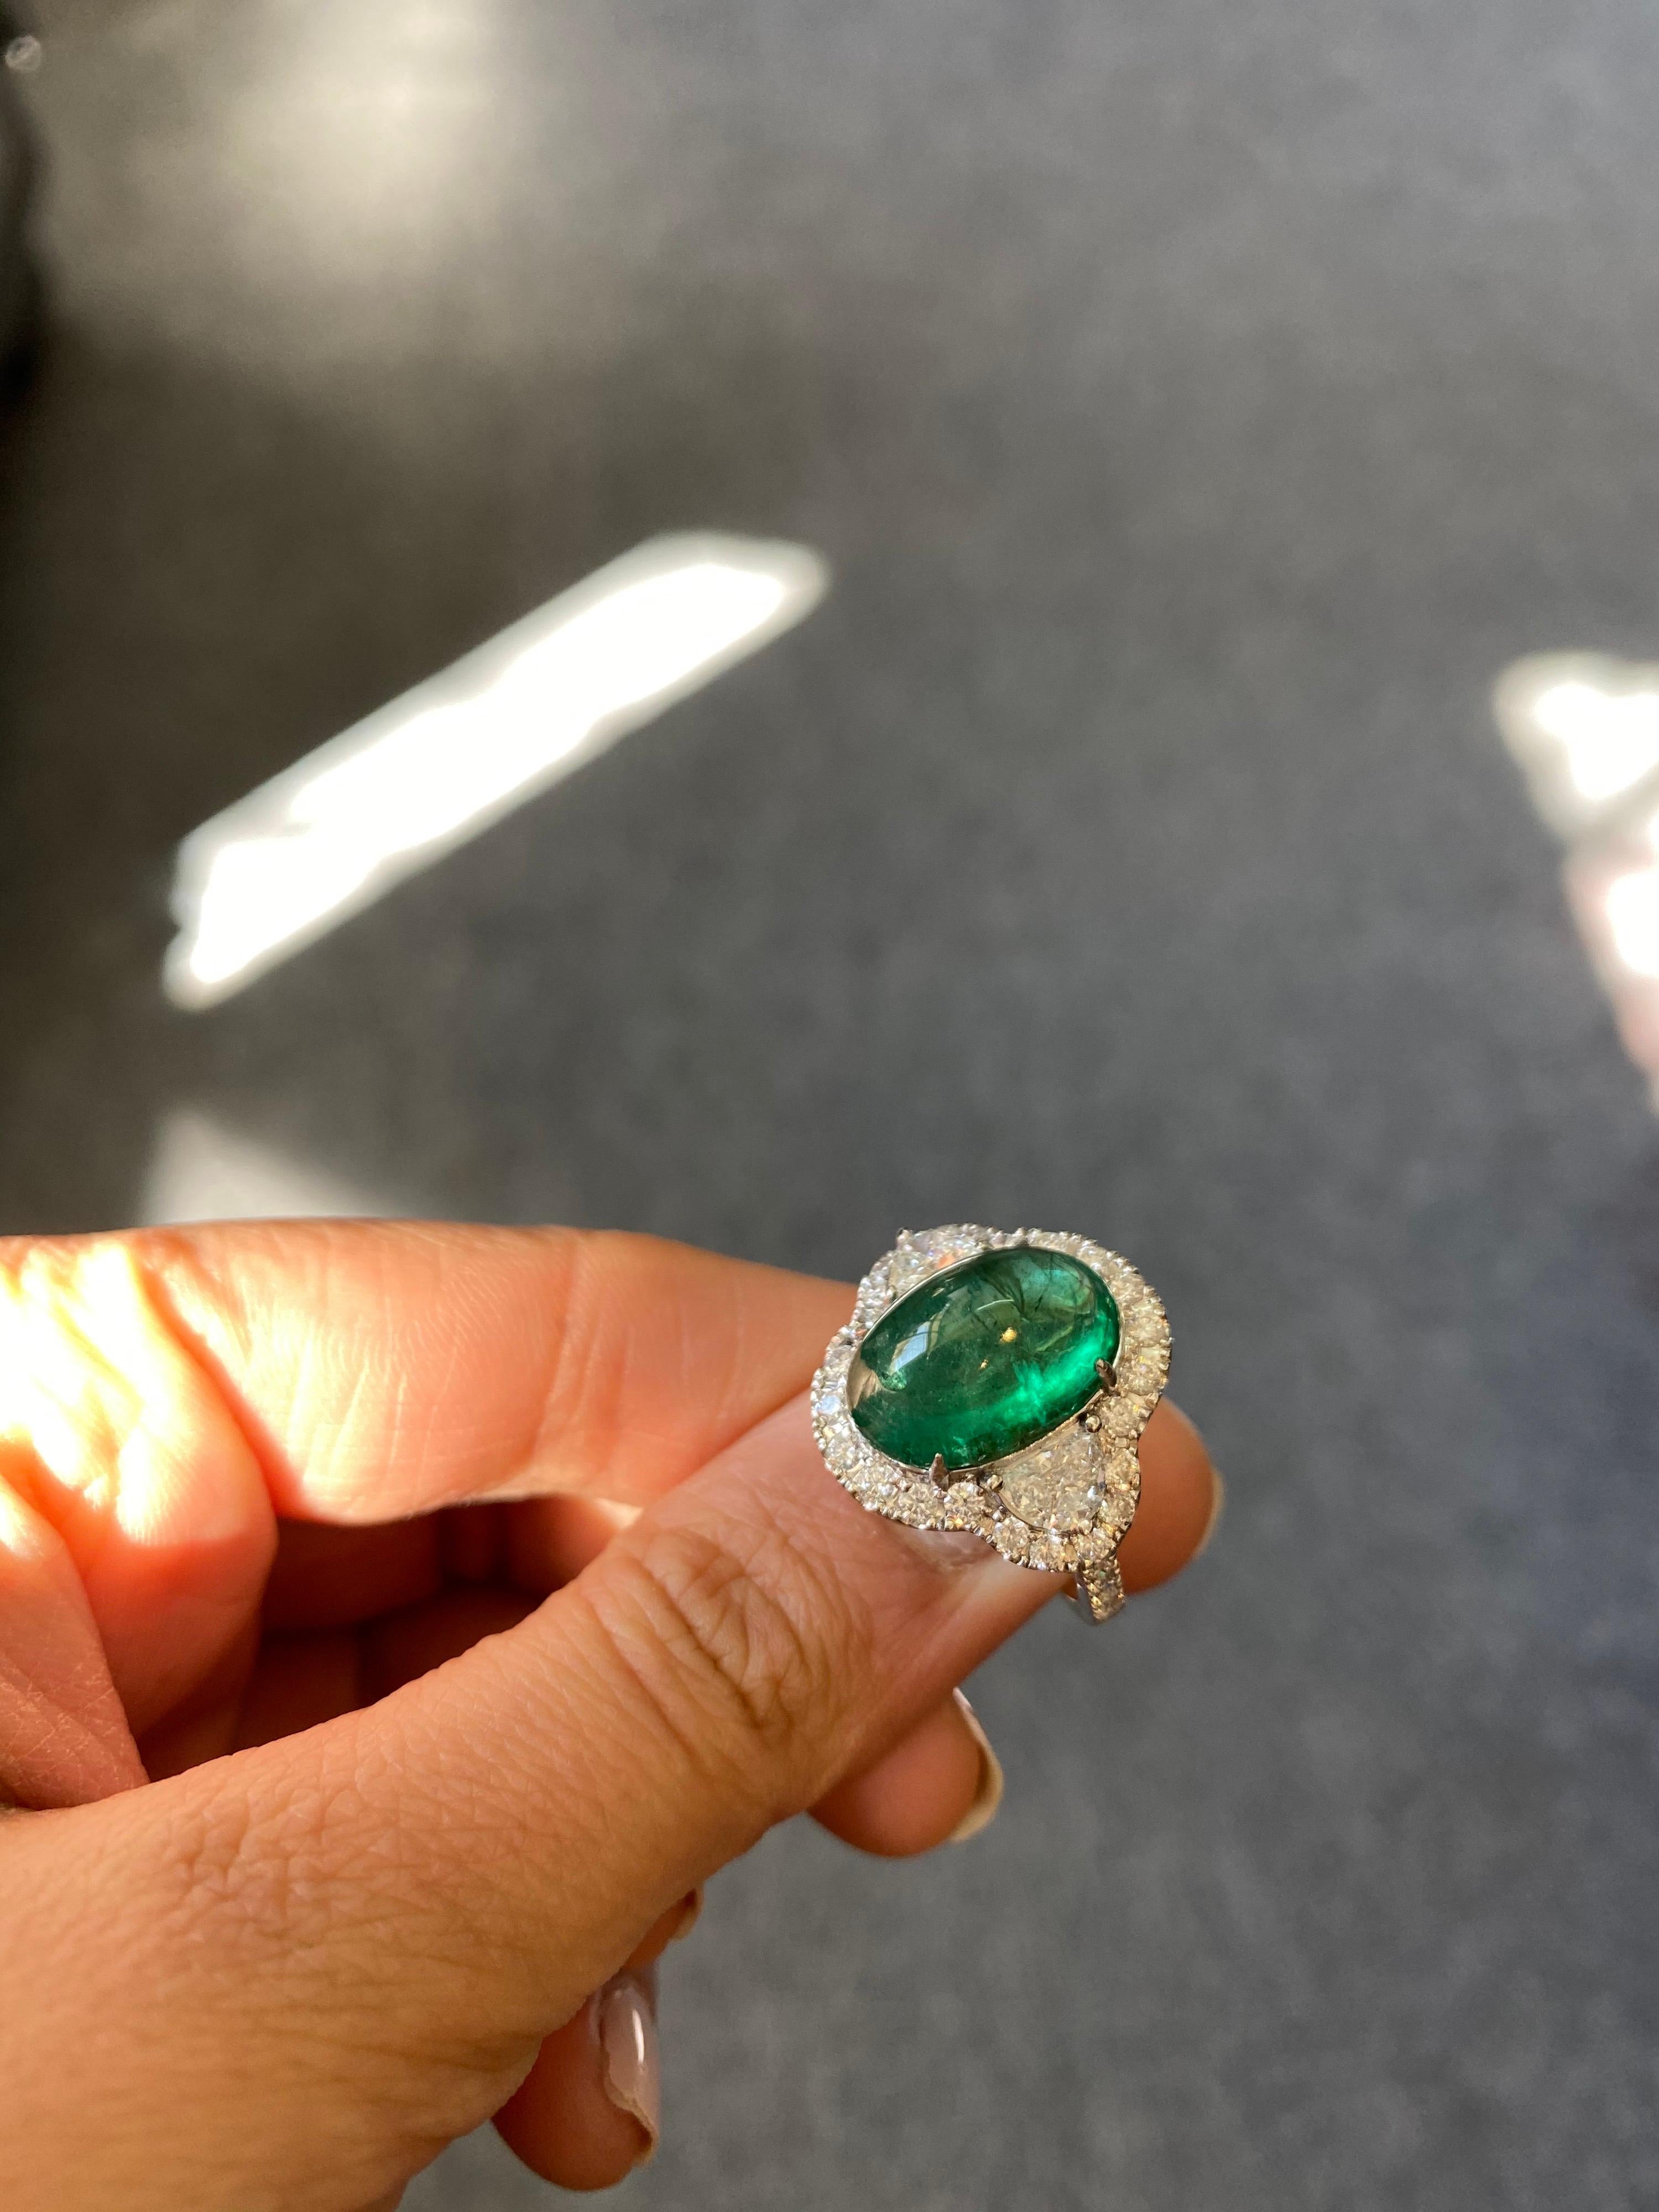 A stunning three-stone engagement ring, with a 7.25 carat transparent Zambian Emerald cabochon centre stone and 2 half-moon side stone diamonds (totalling 0.81 carats), with a diamond halo all set in 18K white gold. Currently a ring size US 6, but